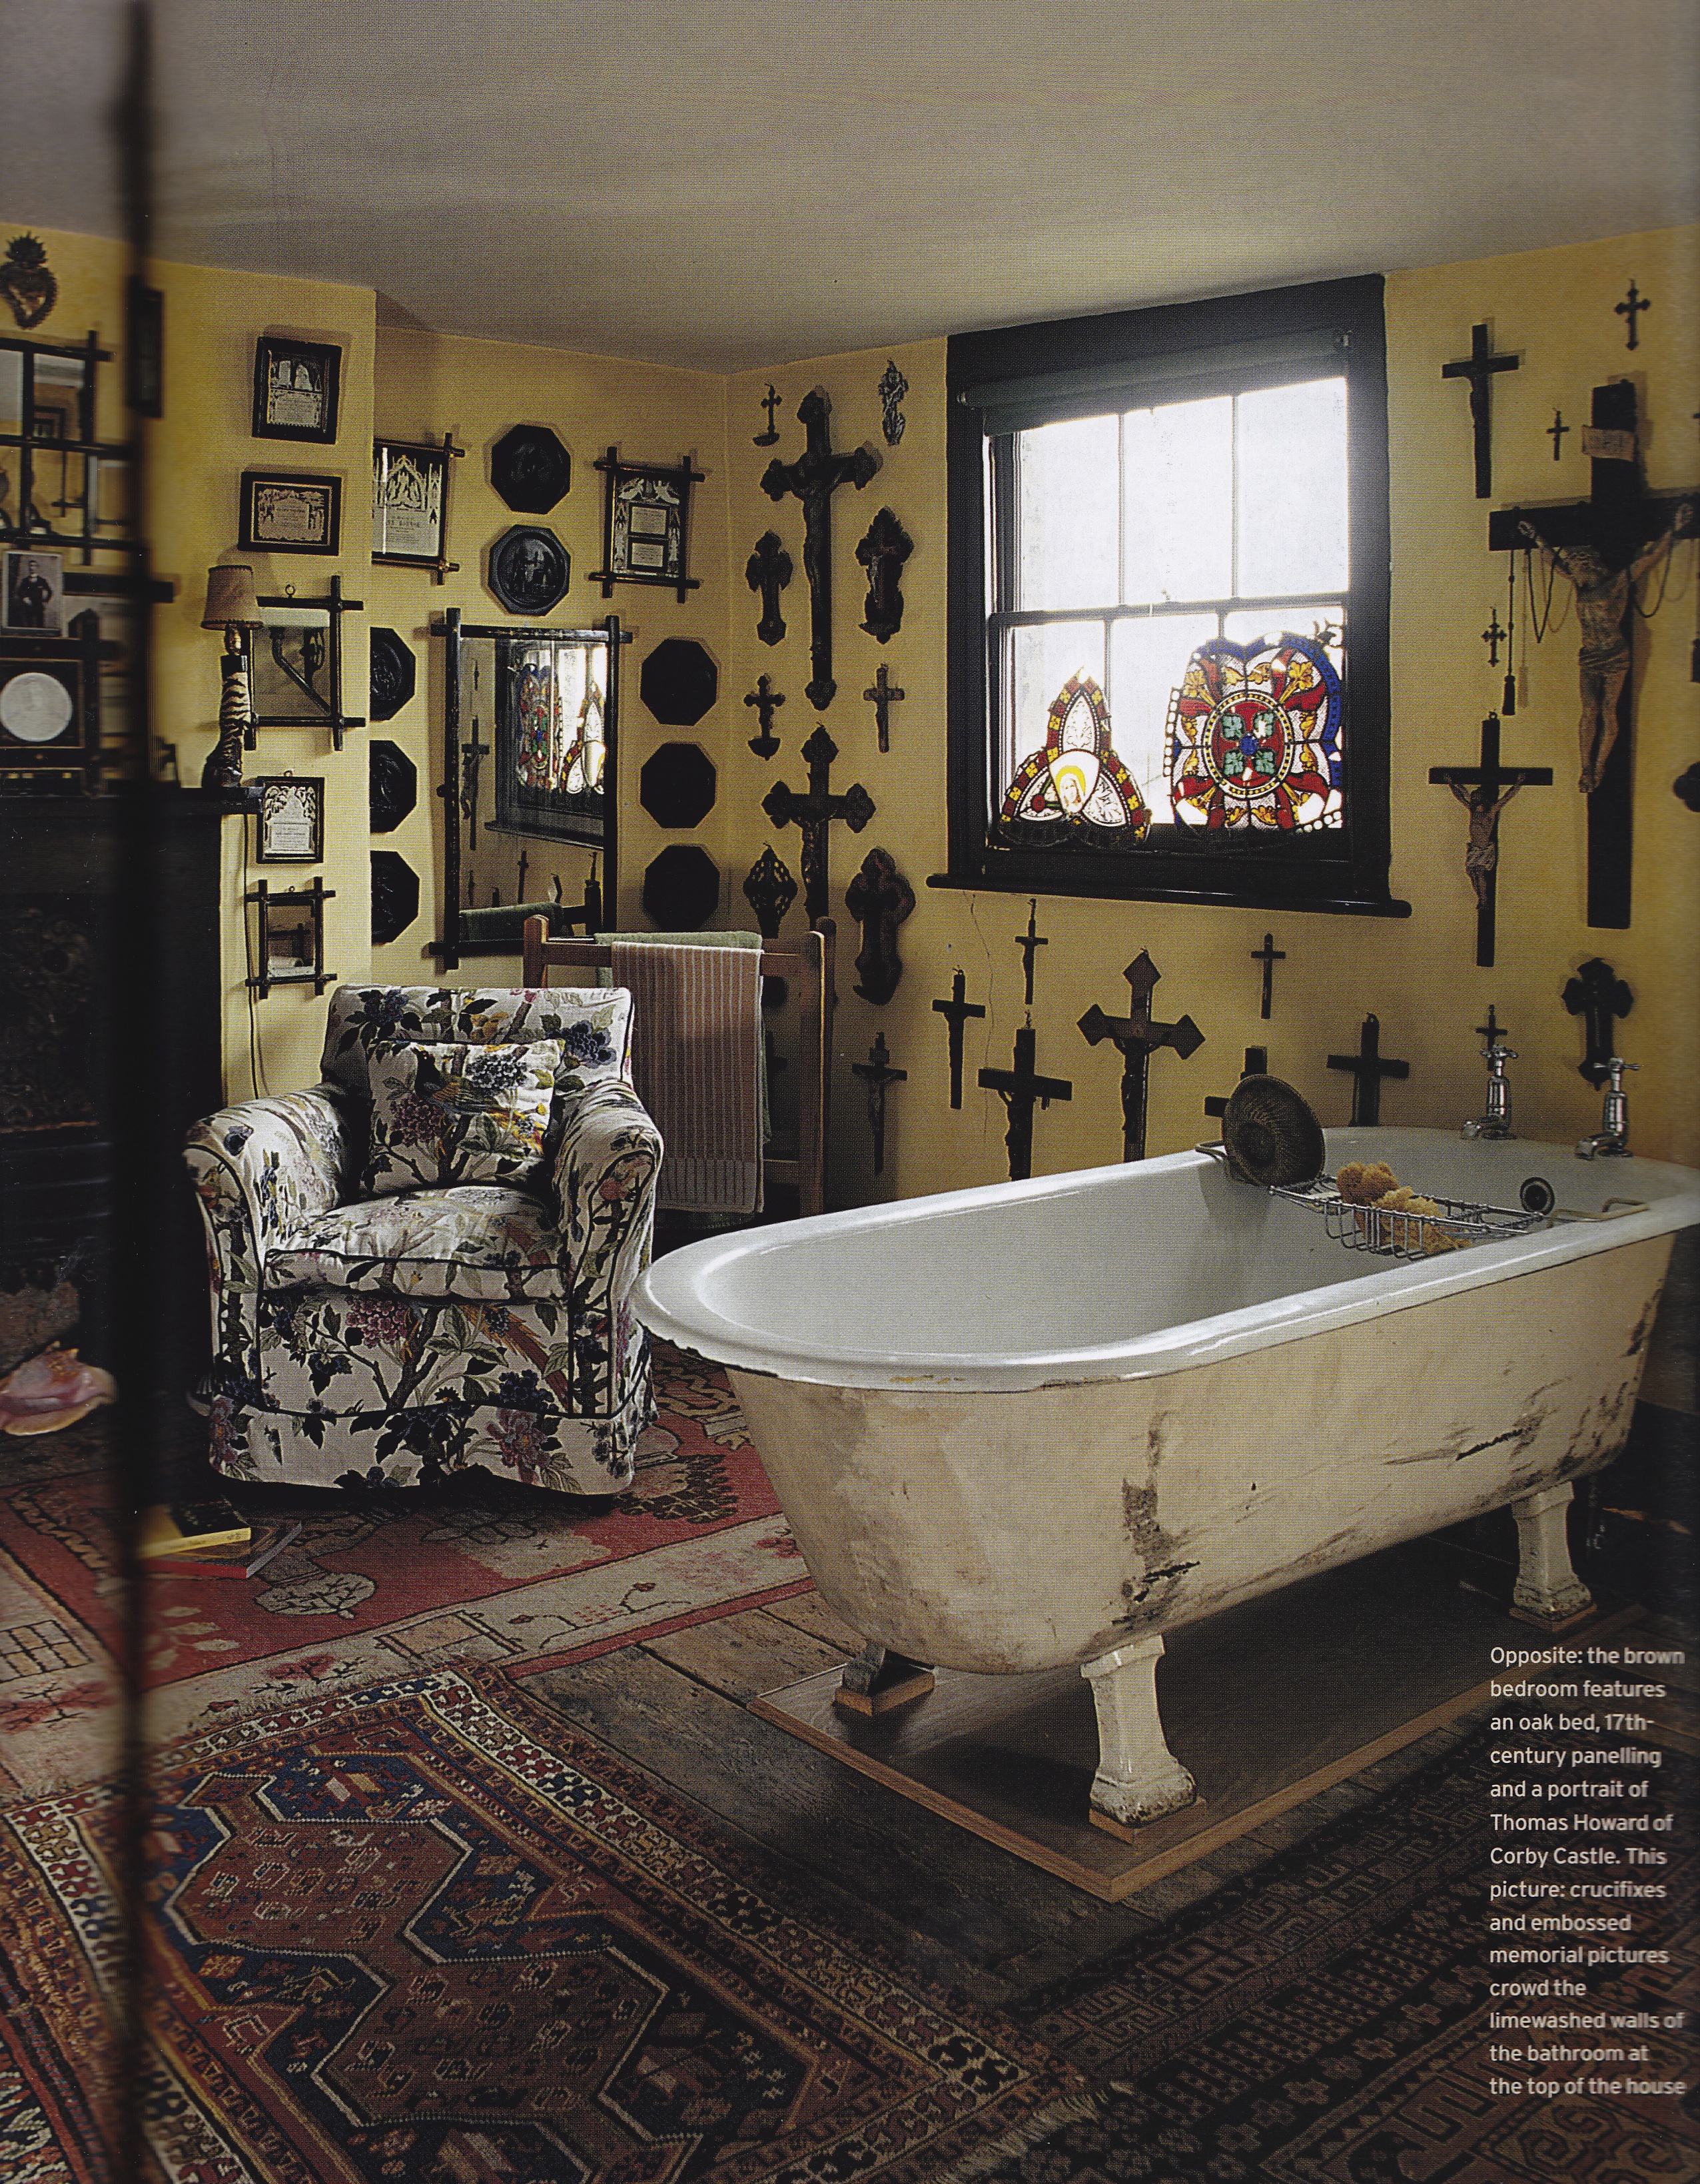 Crucifixes and embossed memorial pictures line the lime-washed walls of a bathroom. Photo by James Mortimer.